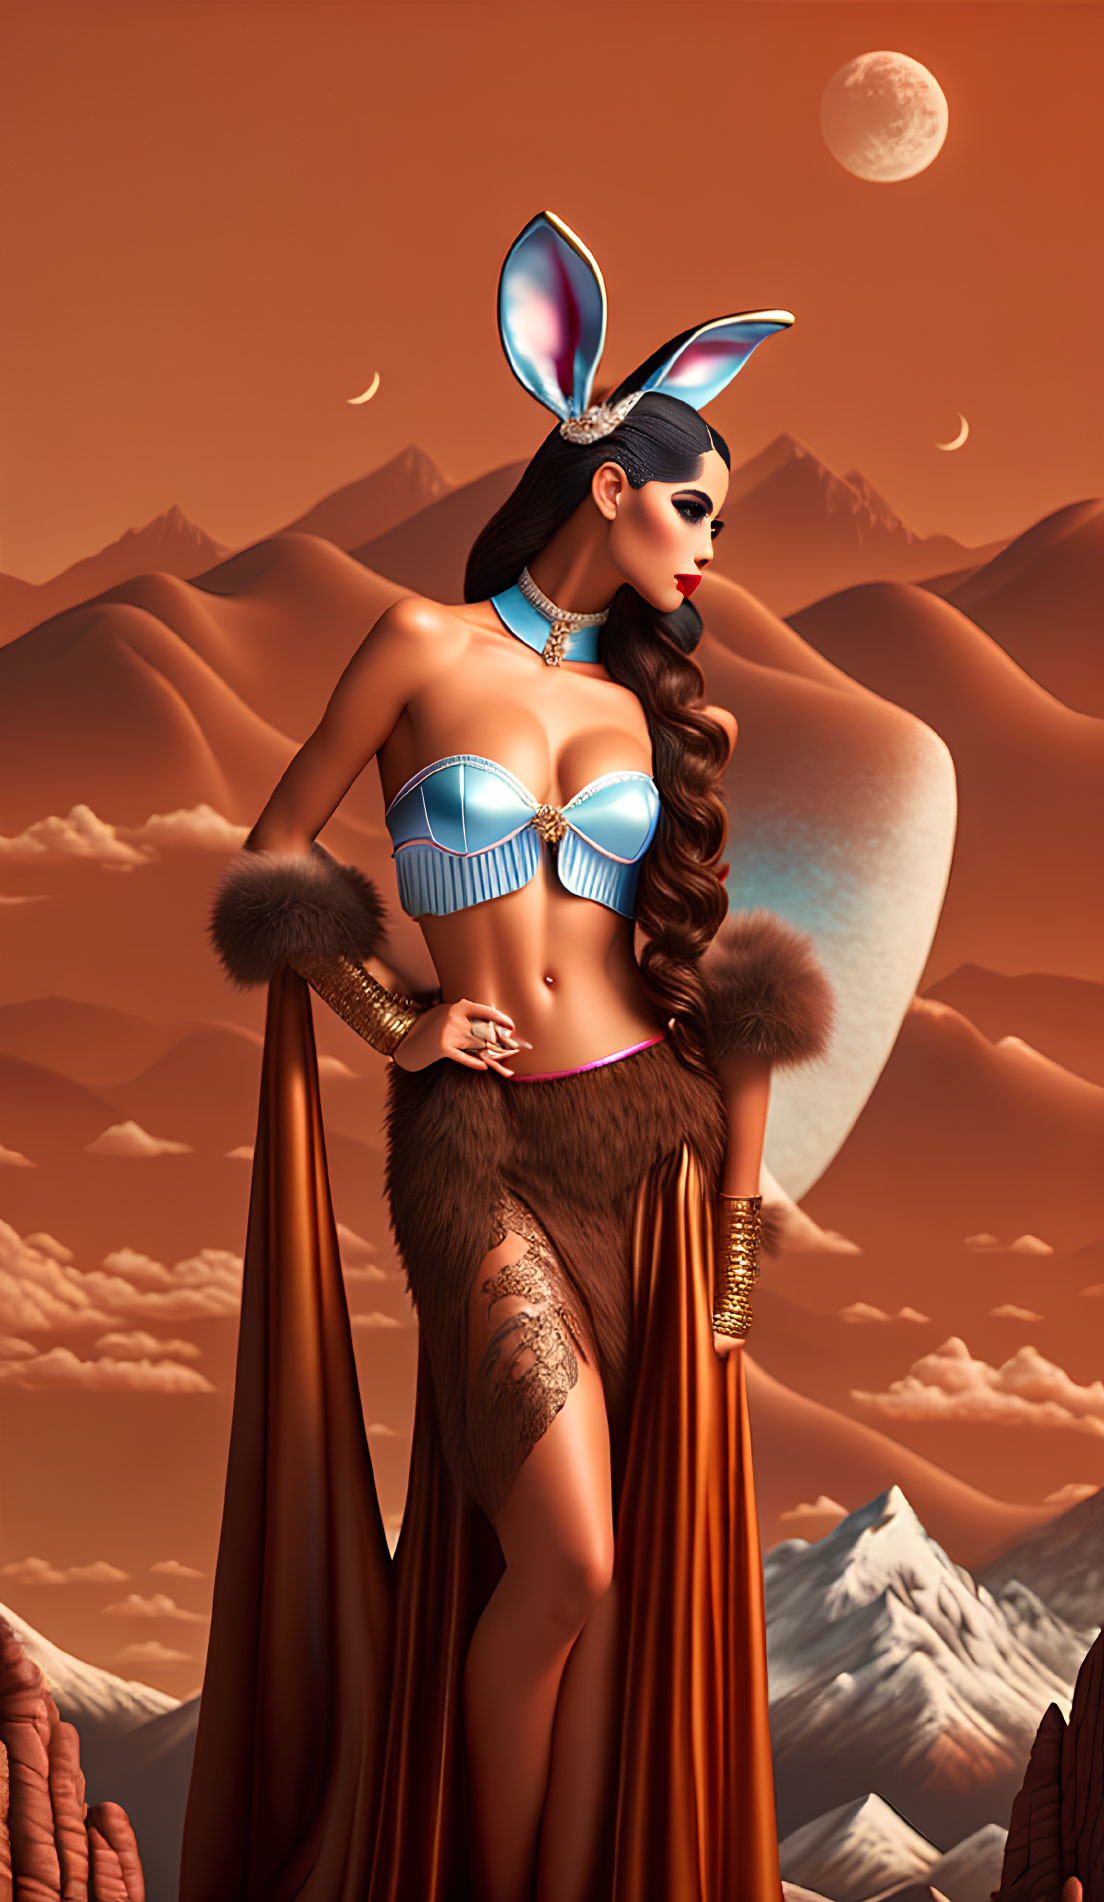 Stylized artwork of woman with bunny ears in futuristic costume against mountain backdrop